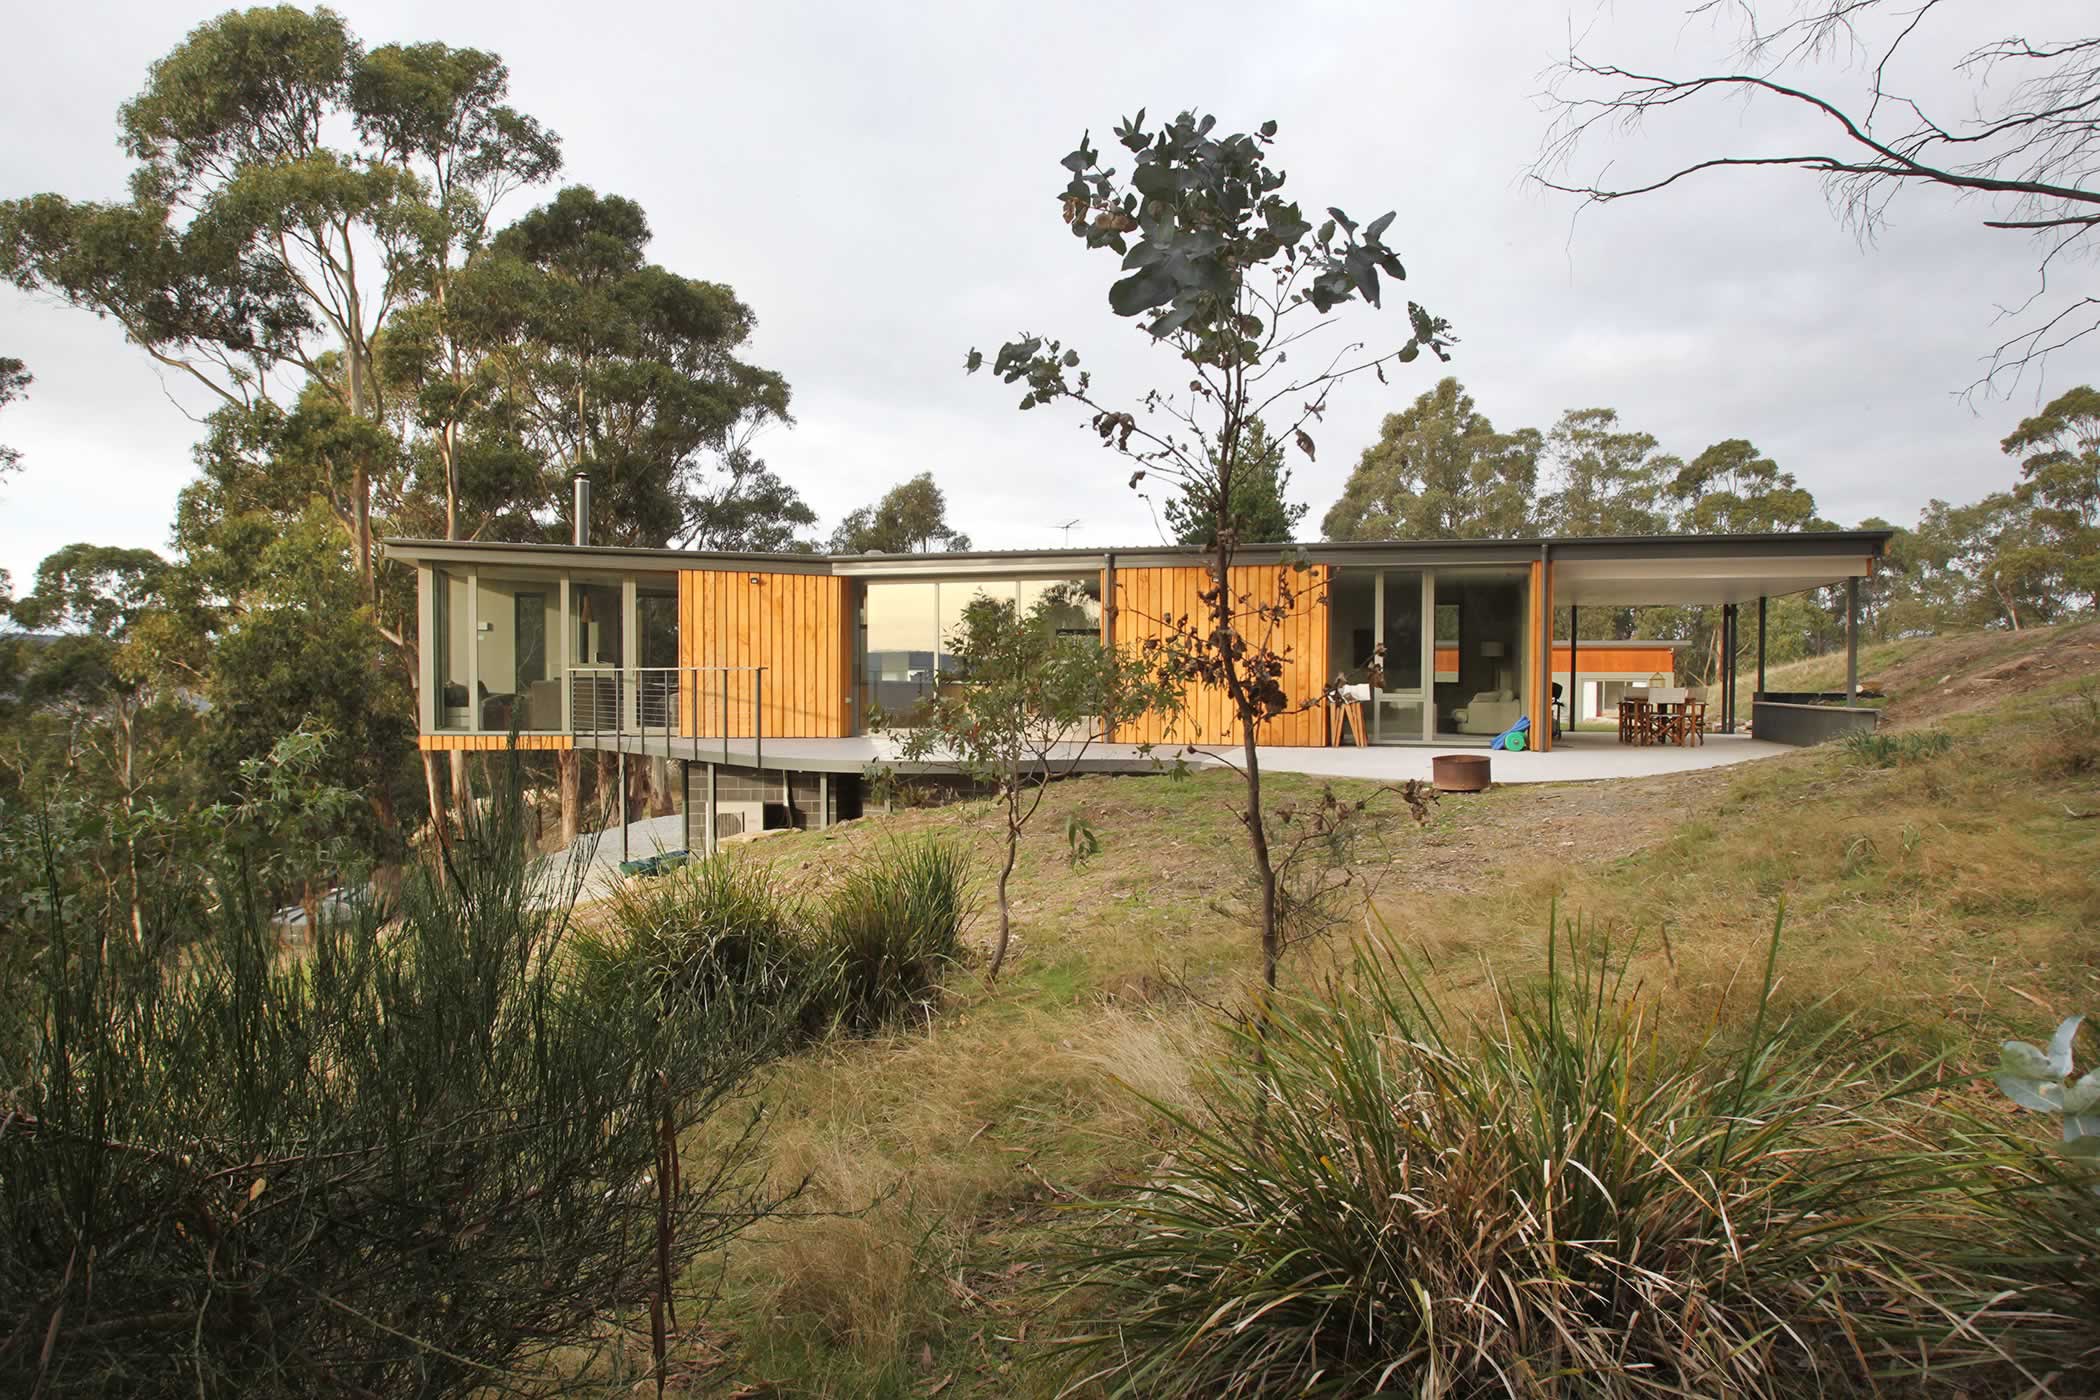 Jamieson Road Residence, Tasmania: Dramatically extending into space for elevated views, the plan is also orientated for optimal passive solar gain and an easy indoor-outdoor connection to meet our clients’ varied lifestyle needs. Photo by R. Lovell.